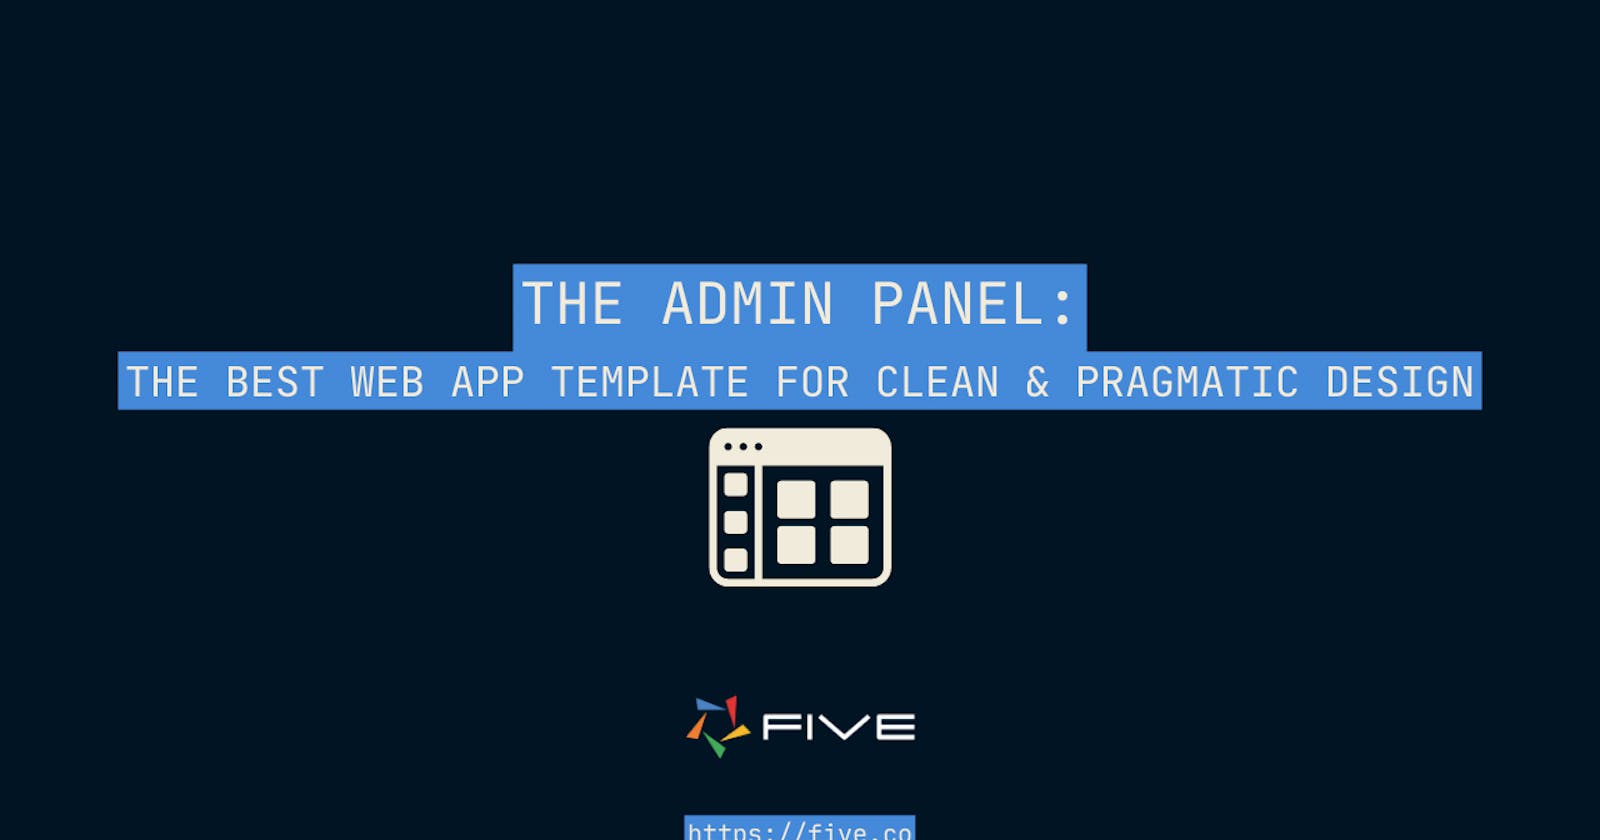 The Admin Panel: The Best Web App Template for Clean & Pragmatic Design